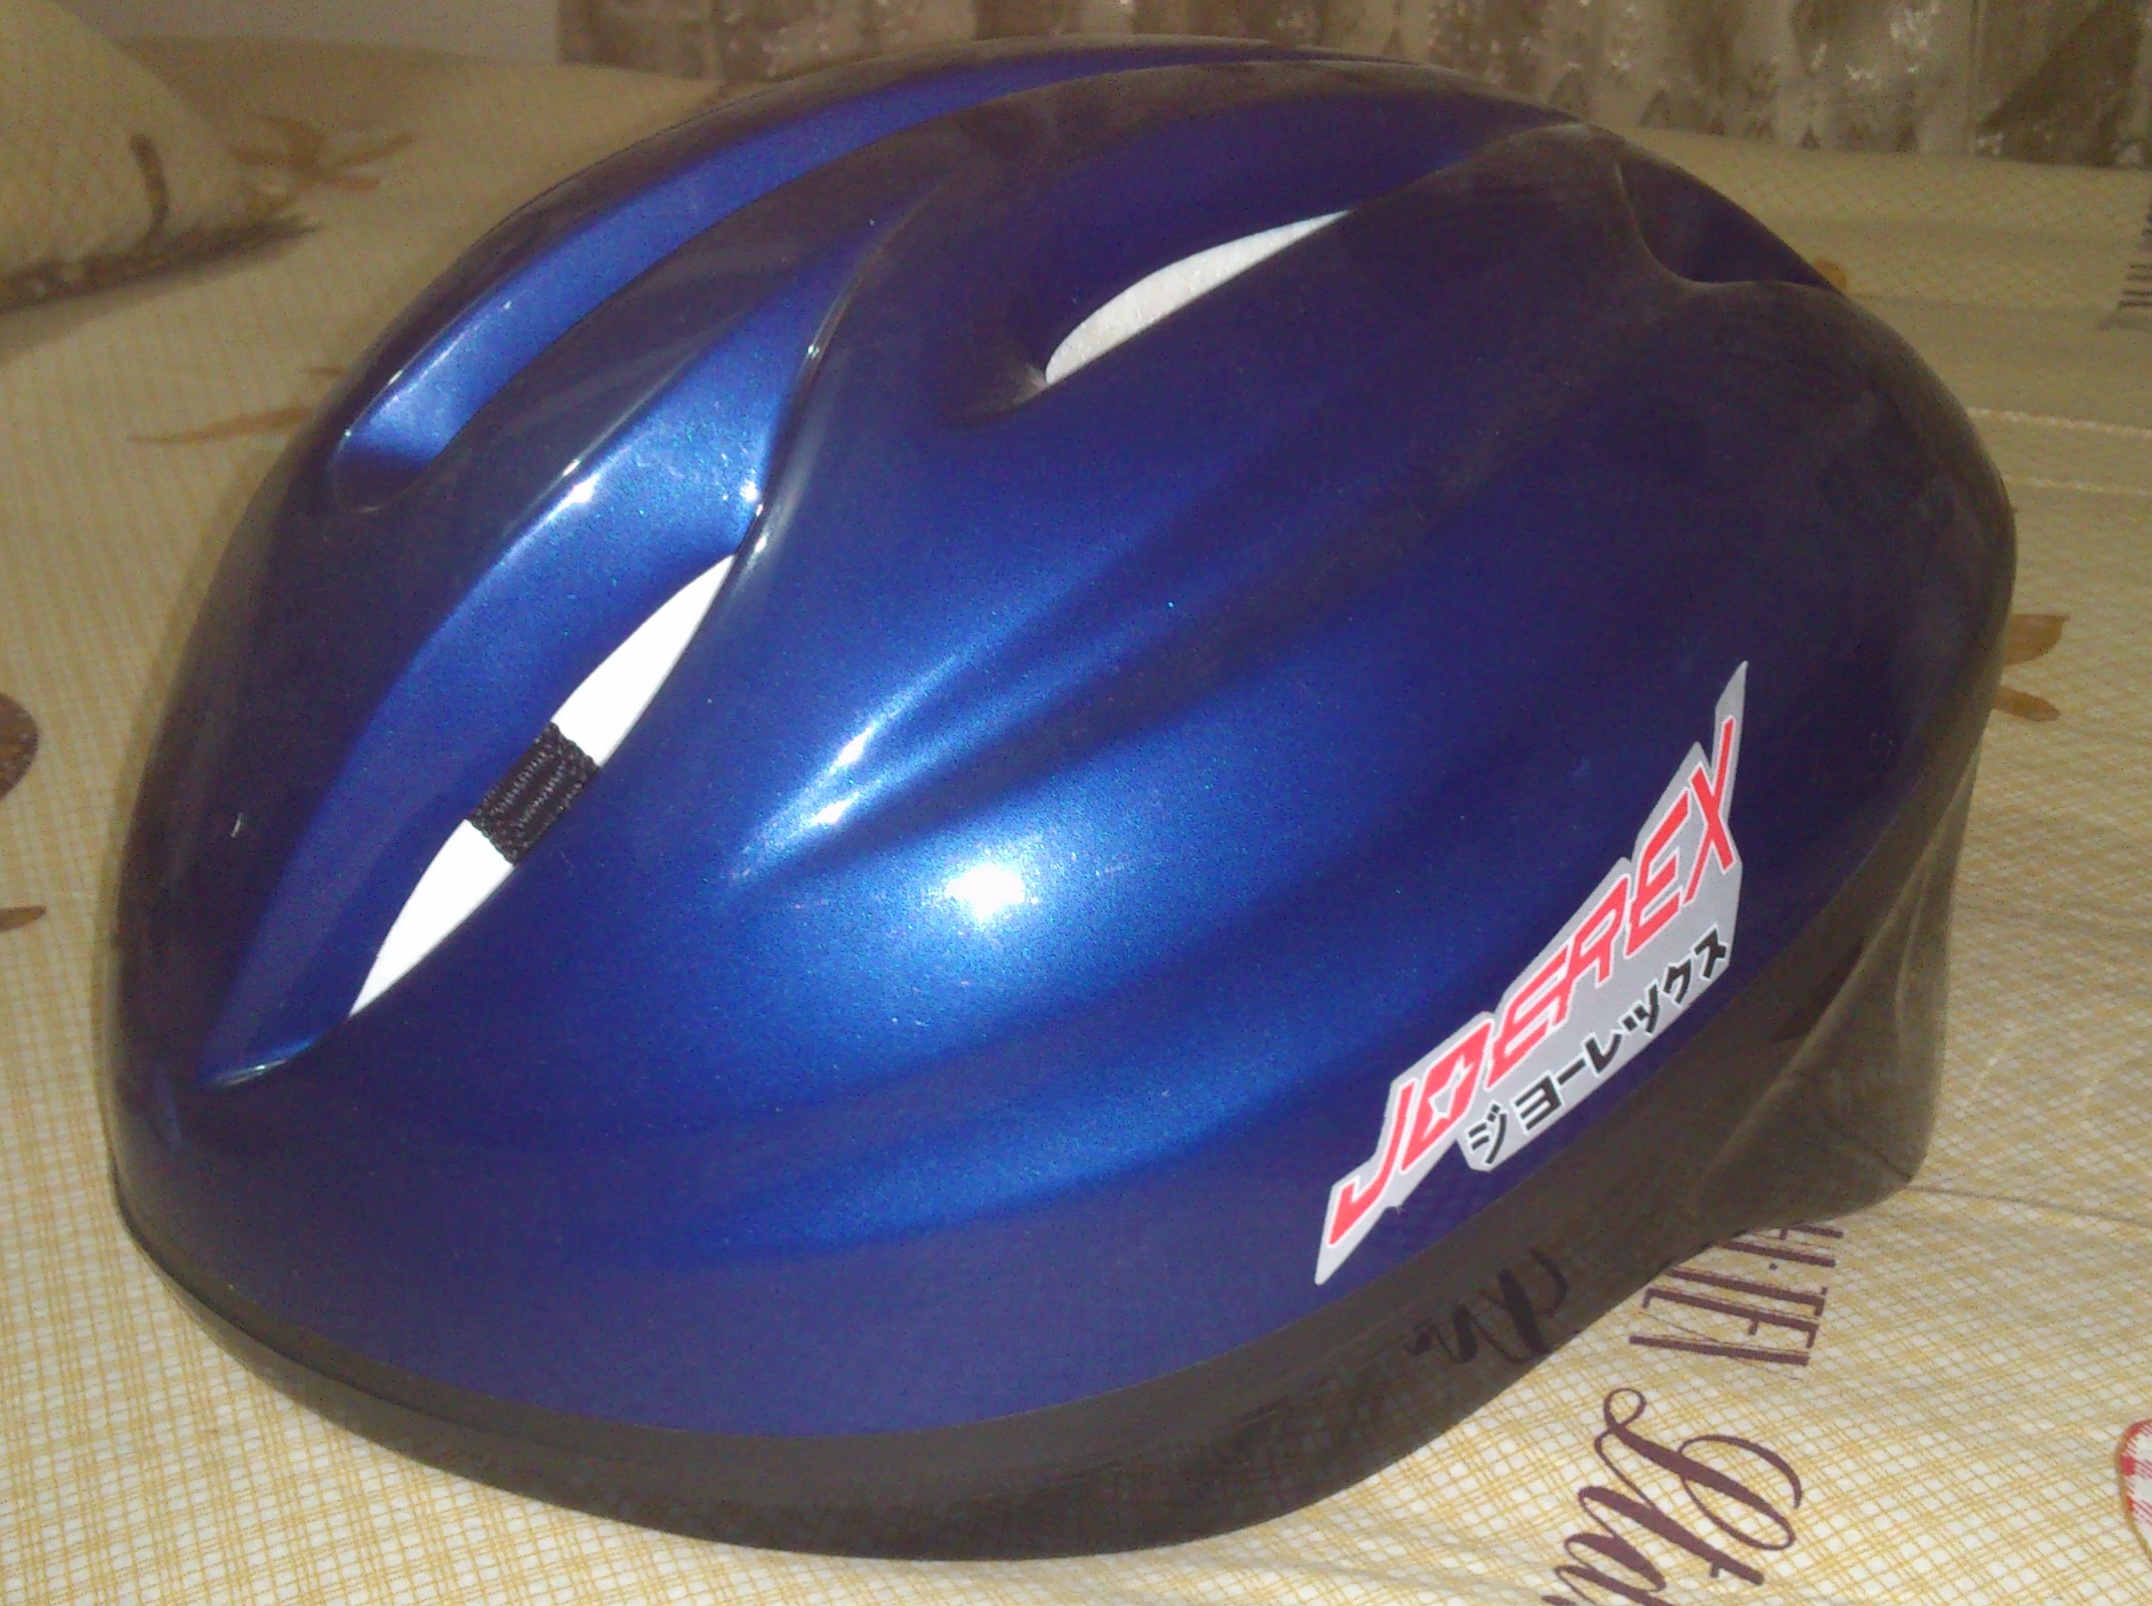 Cycling helmet only one day used market price 1000 large image 0